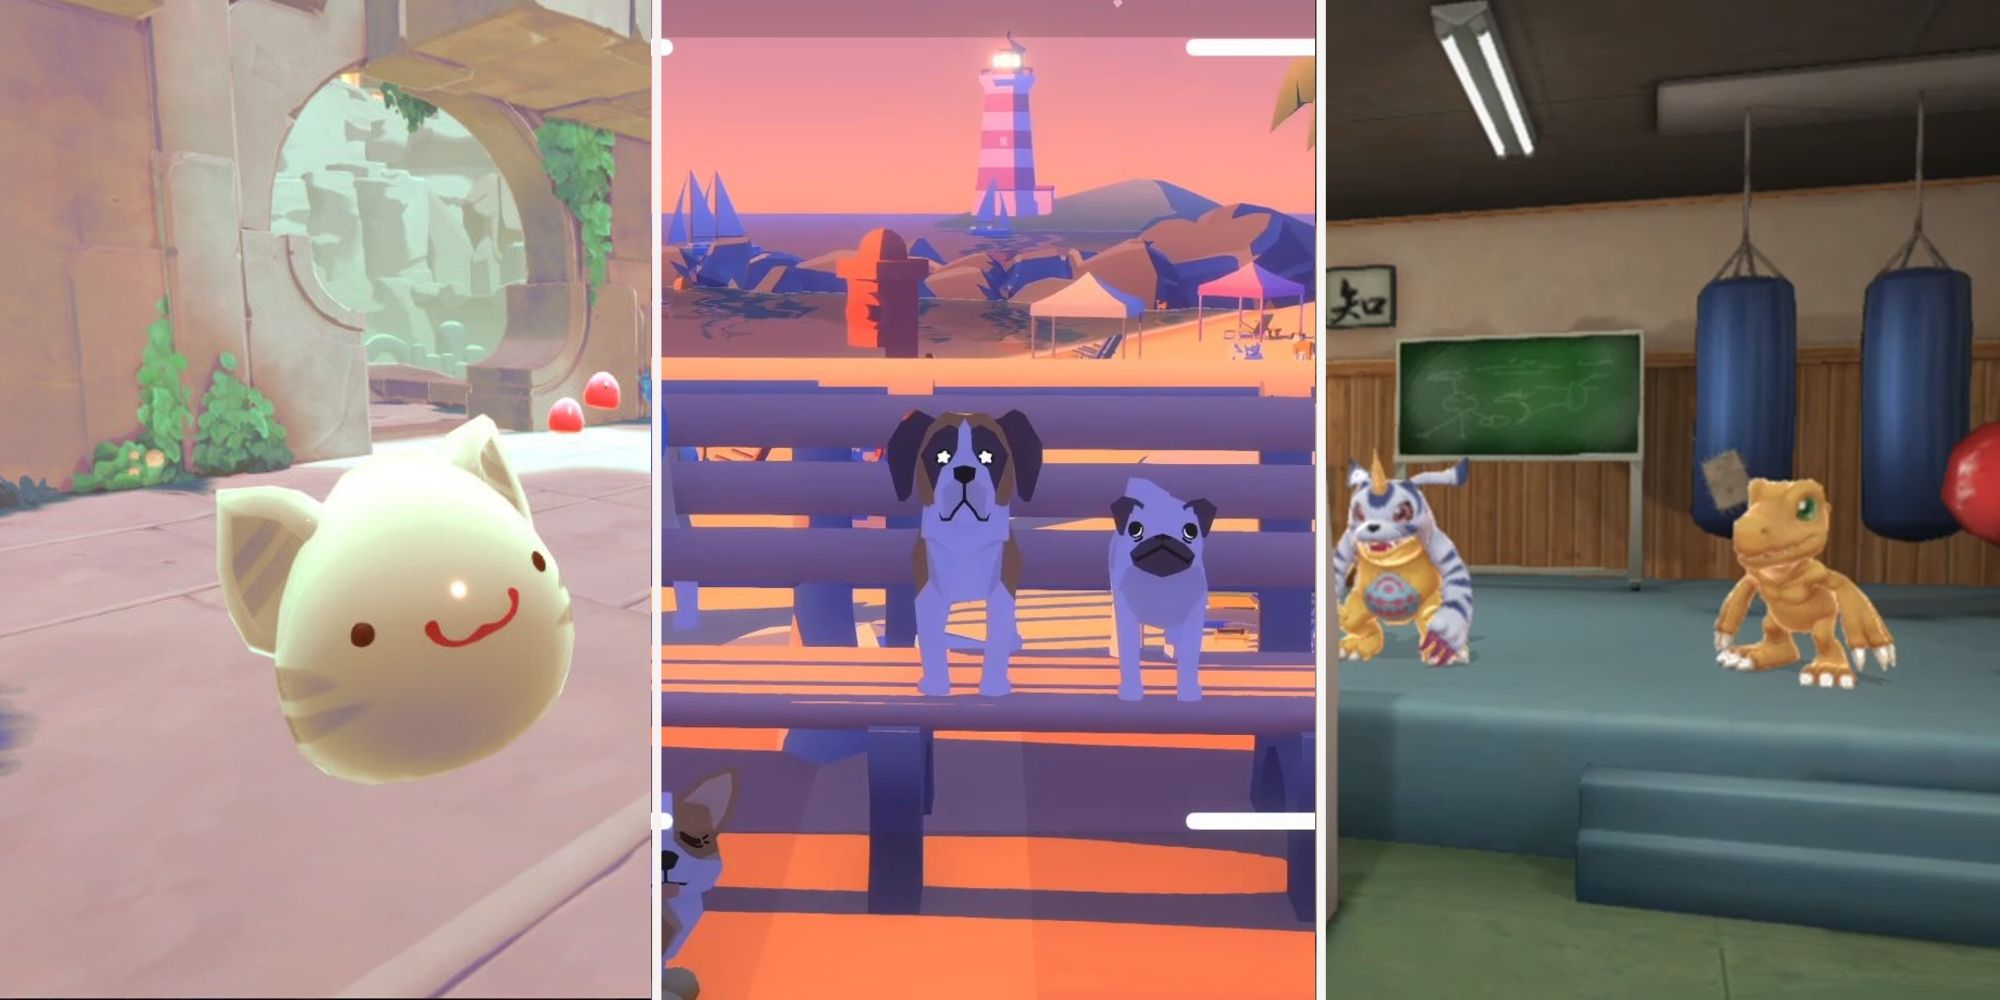 A Cat Slime, Dogs on a Bench, and Digimon in a training room